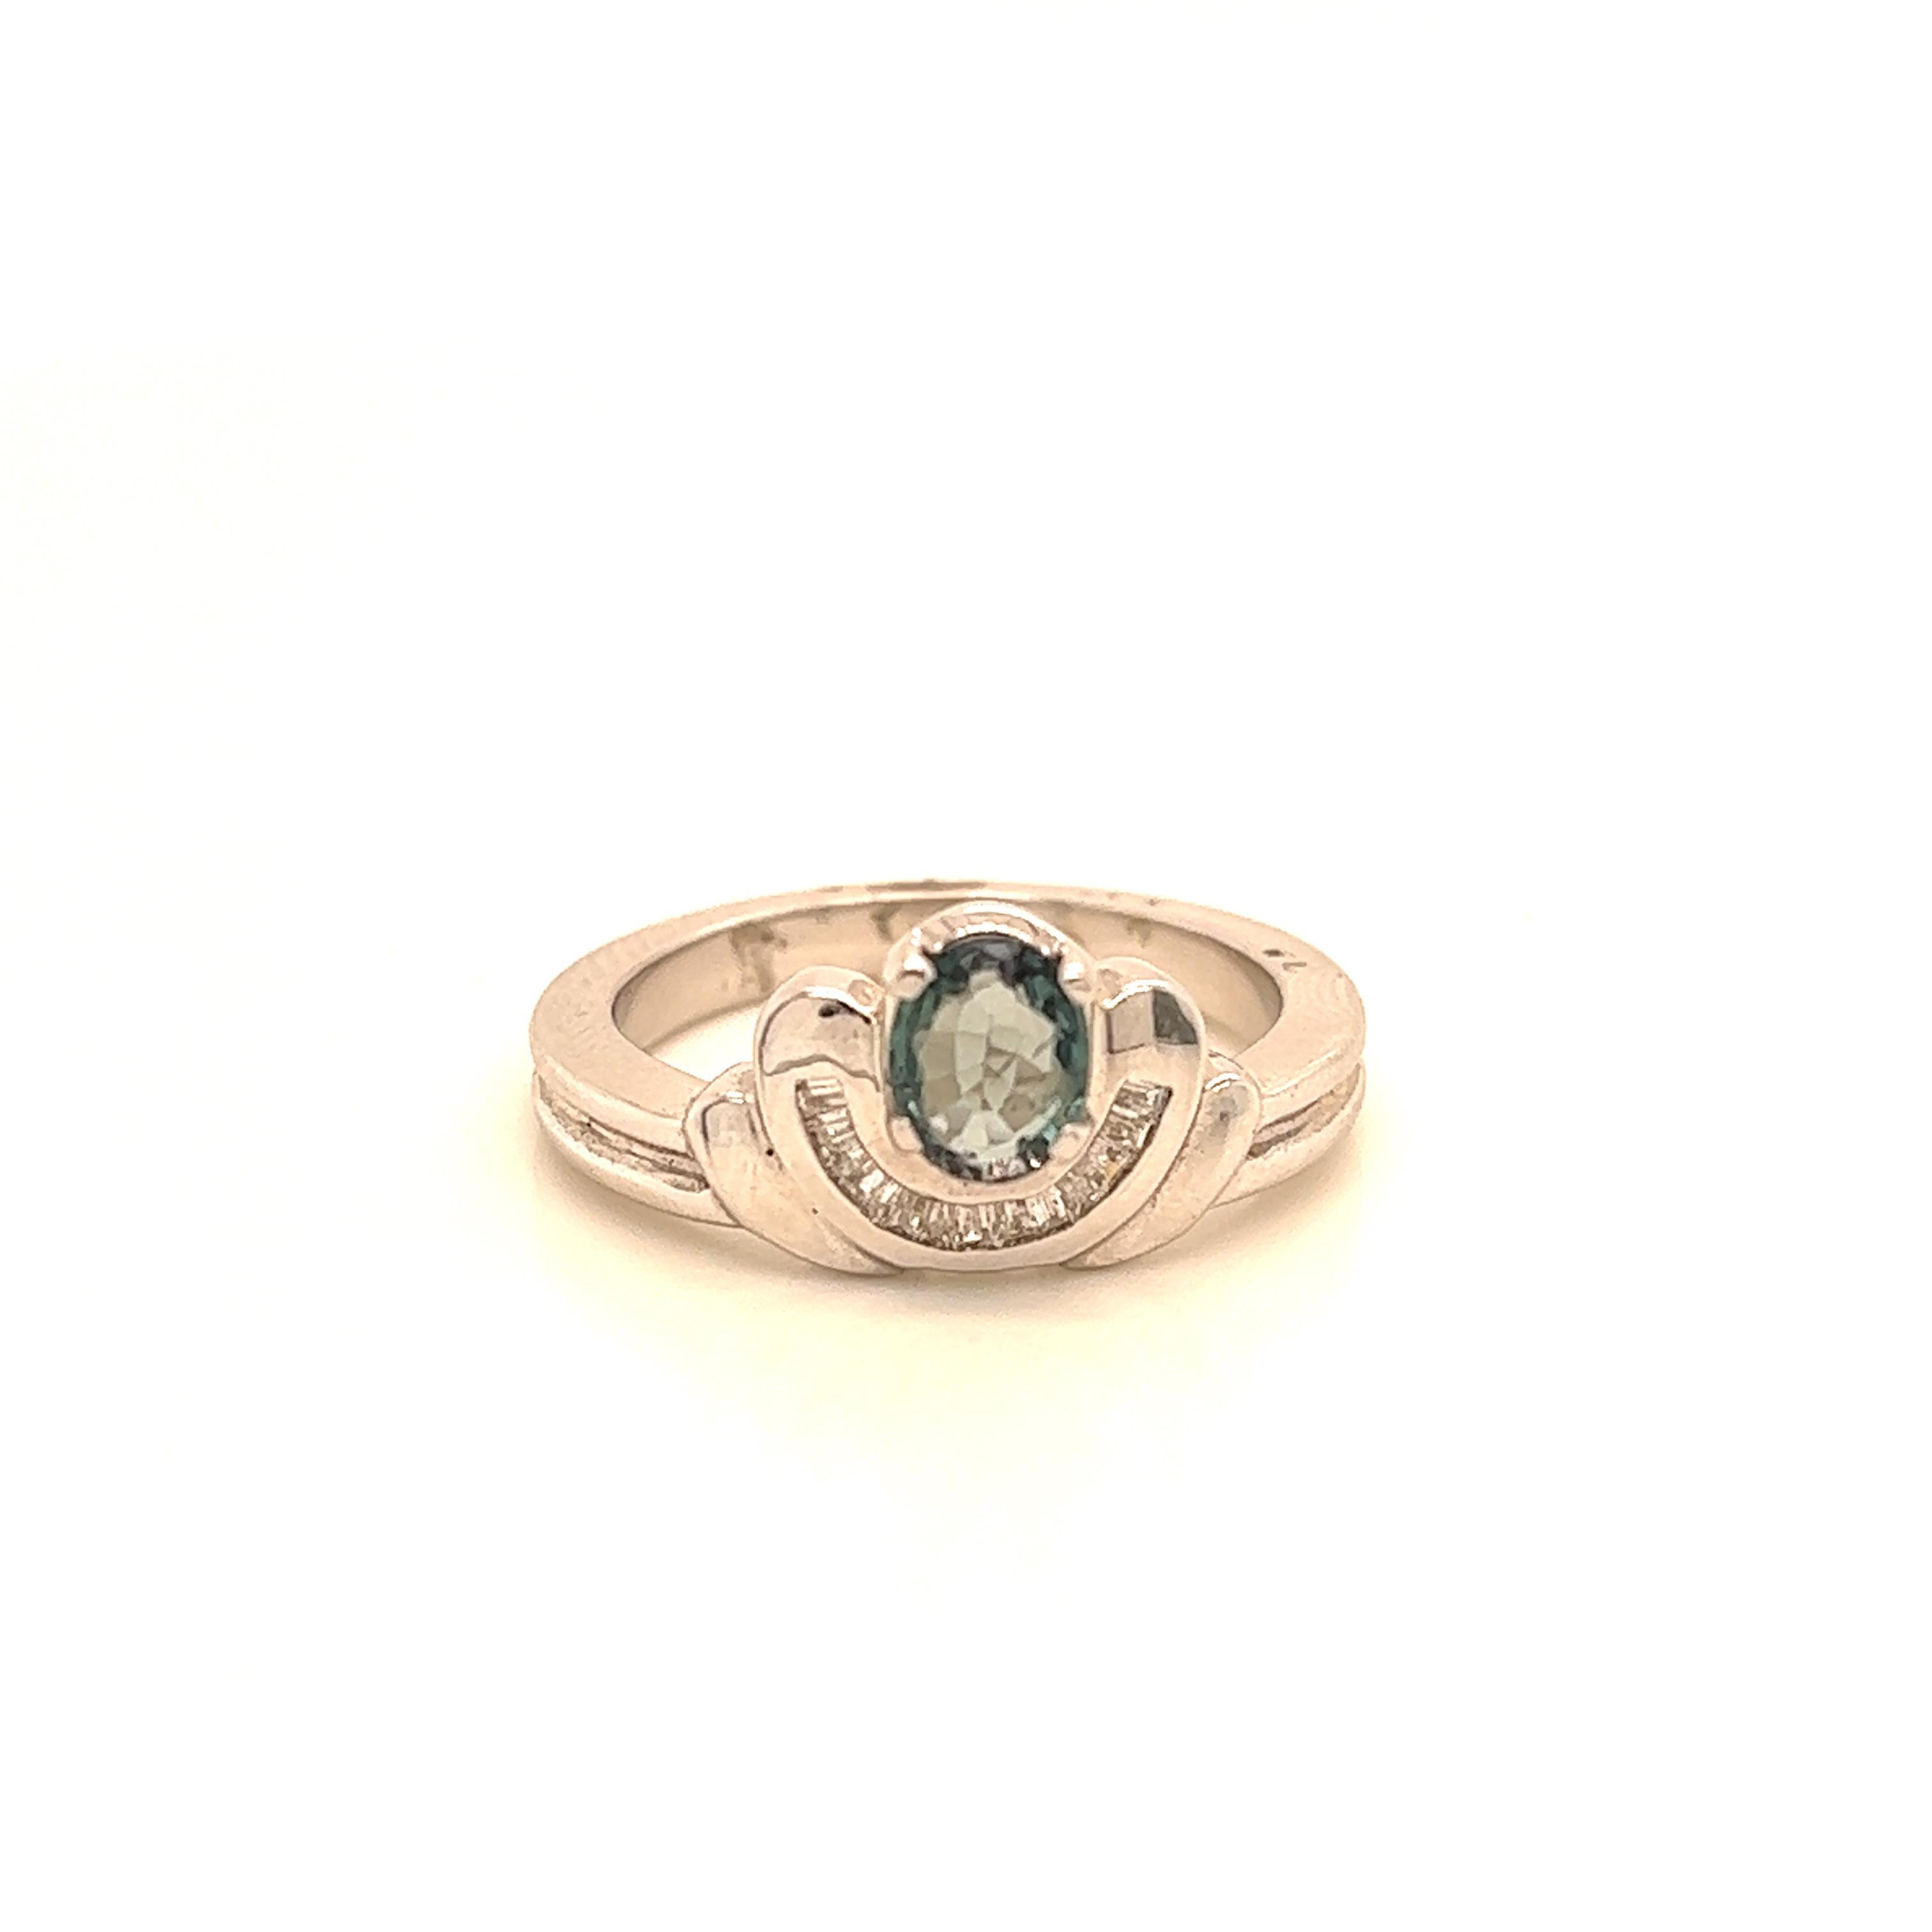 This is a gorgeous natural AAA quality Oval Alexandrite with Baguette diamonds that is set in solid 18K white gold. This ring features a natural 0.73 carat oval alexandrite that is certified by the Gemological Institute of America (GIA). The ring is